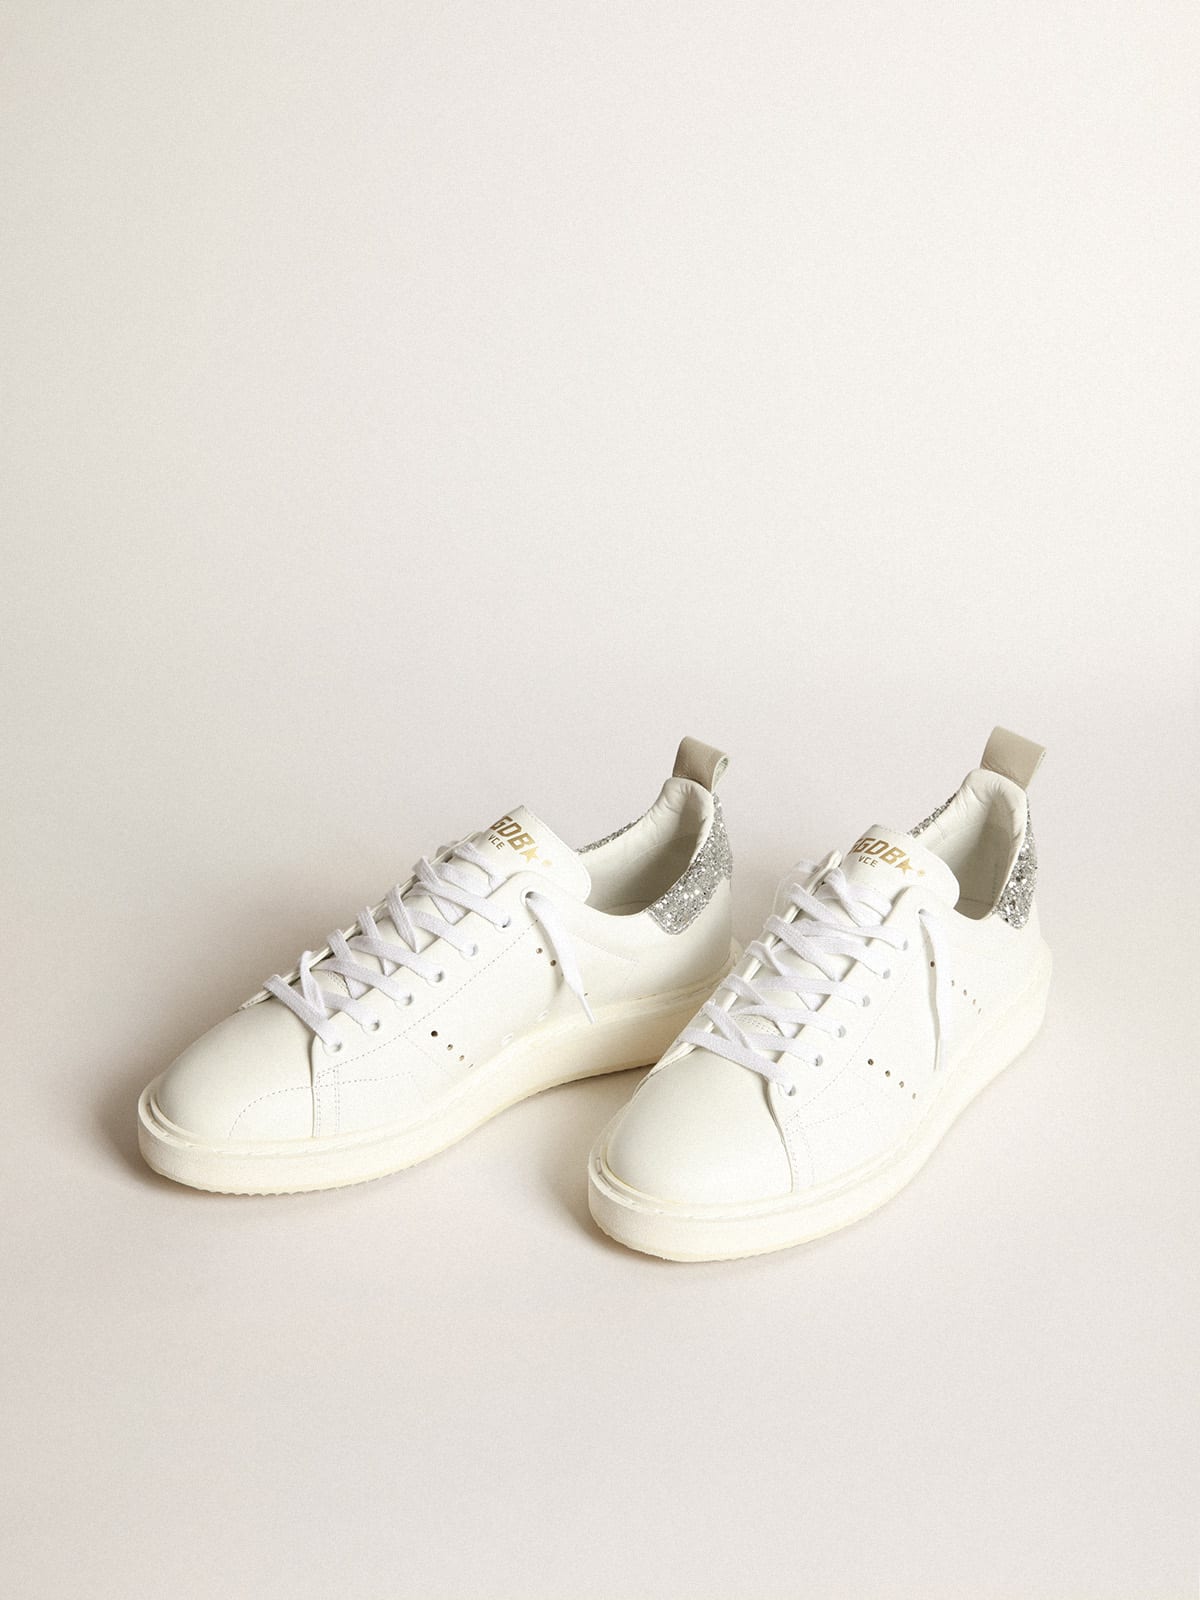 Köp Golden Goose Starter sneakers in white leather with silver glitter ...